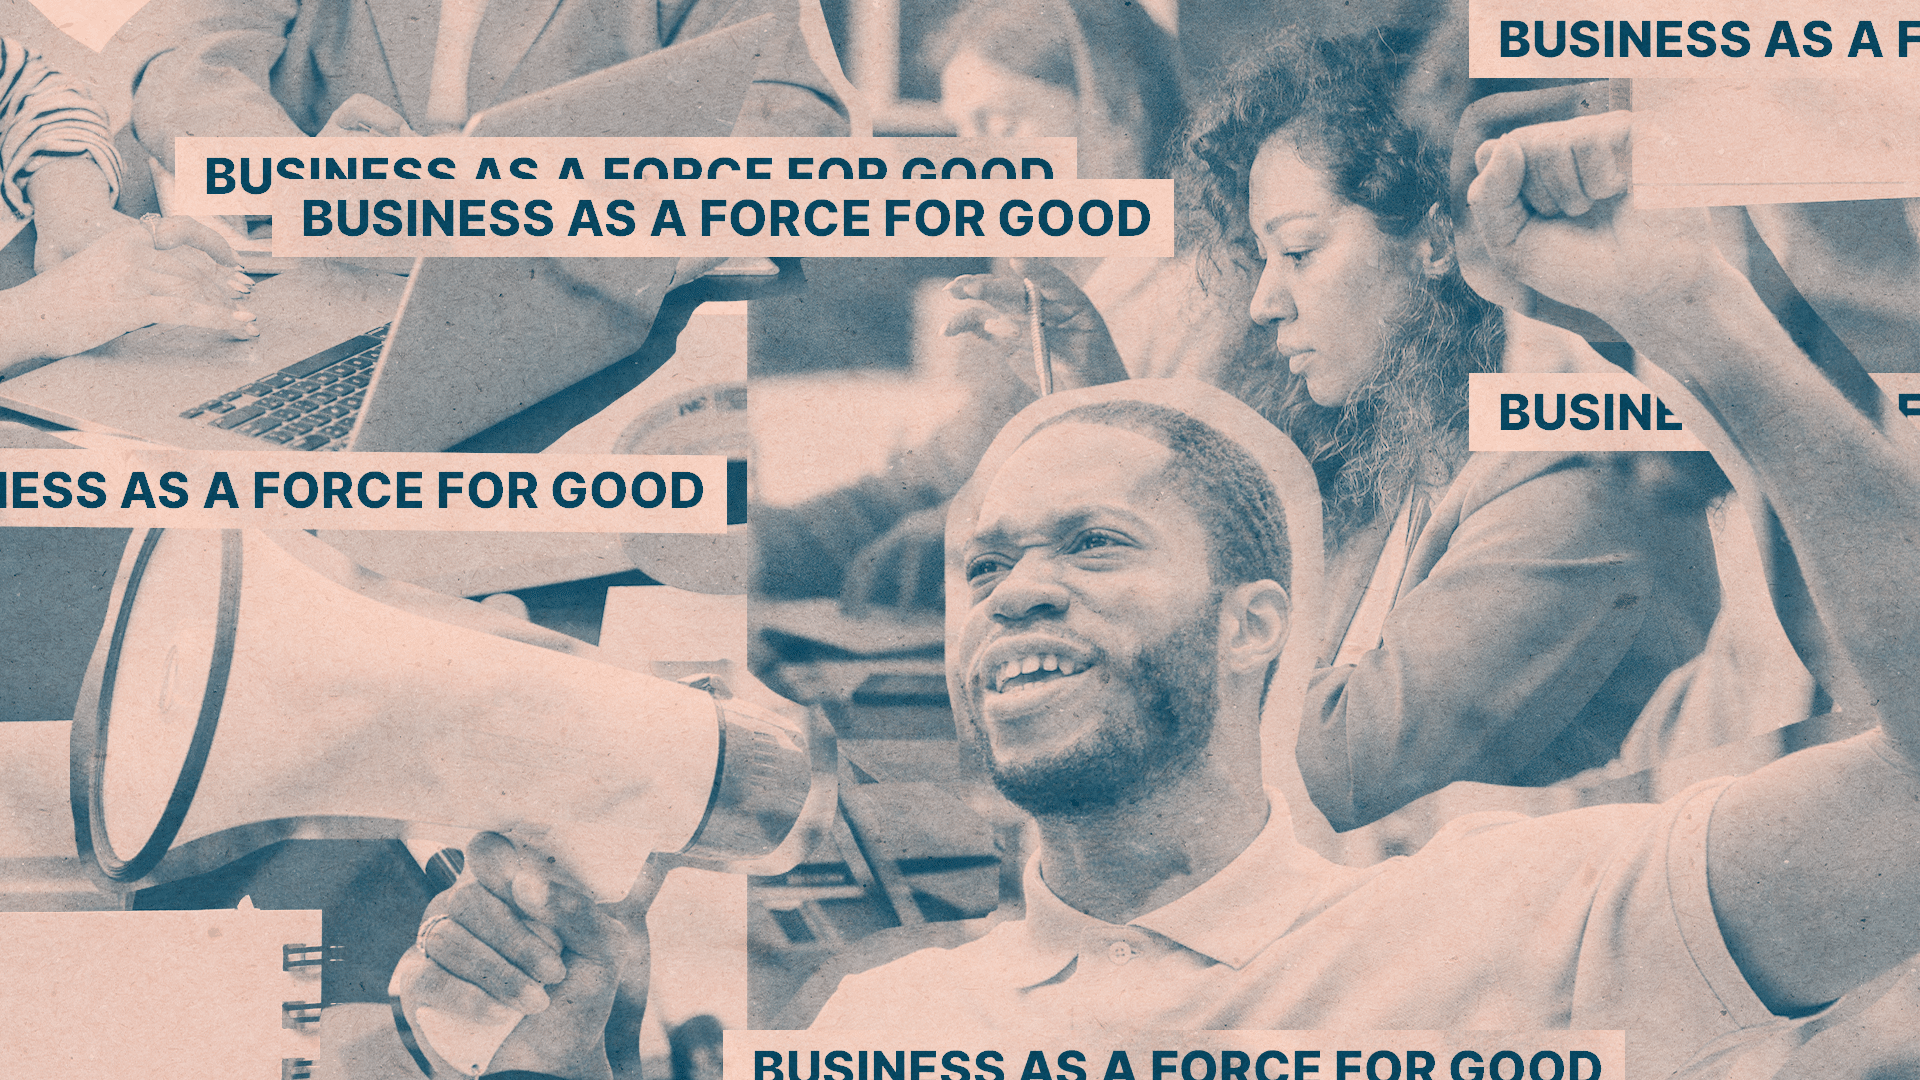 Collage of person with megaphone, people coworking, and text reading "business as a force for good"